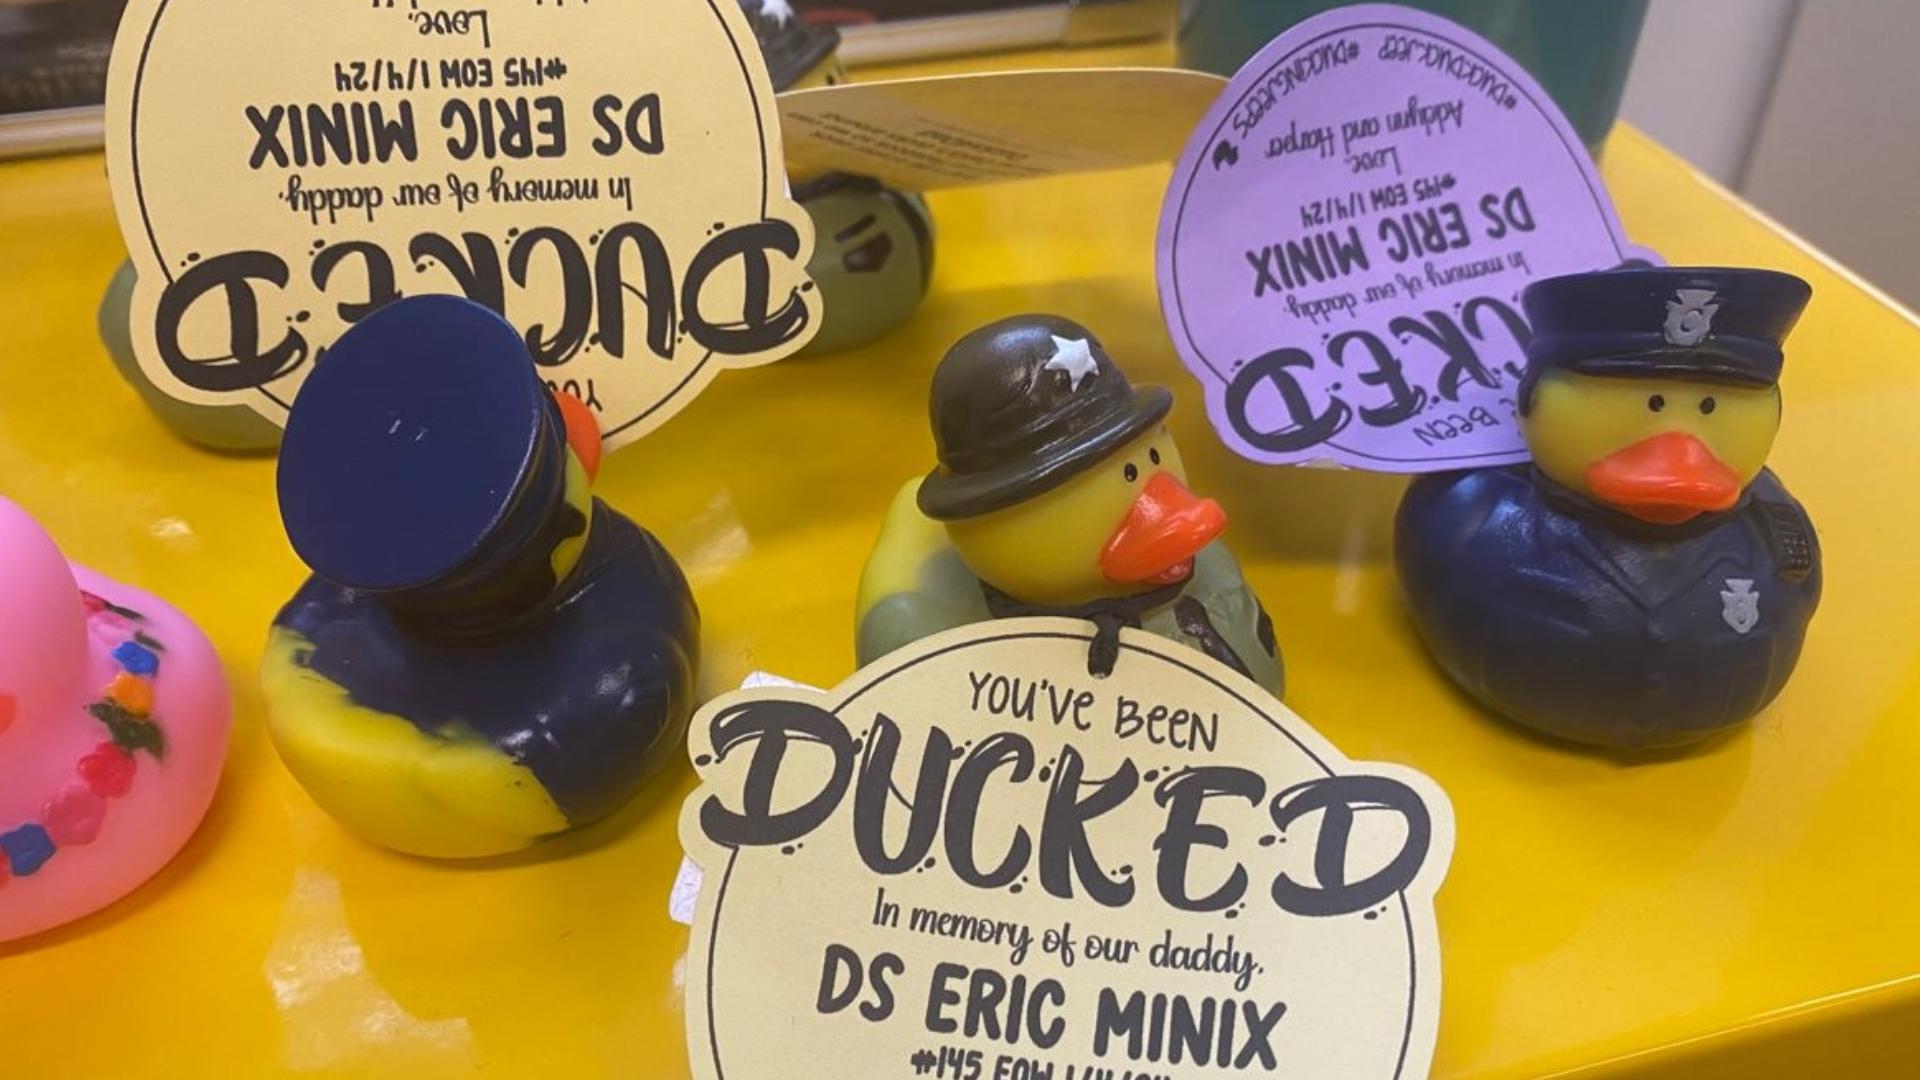 The Minix family is spreading joy with rubber ducks while making sure their father's legacy isn't forgotten.